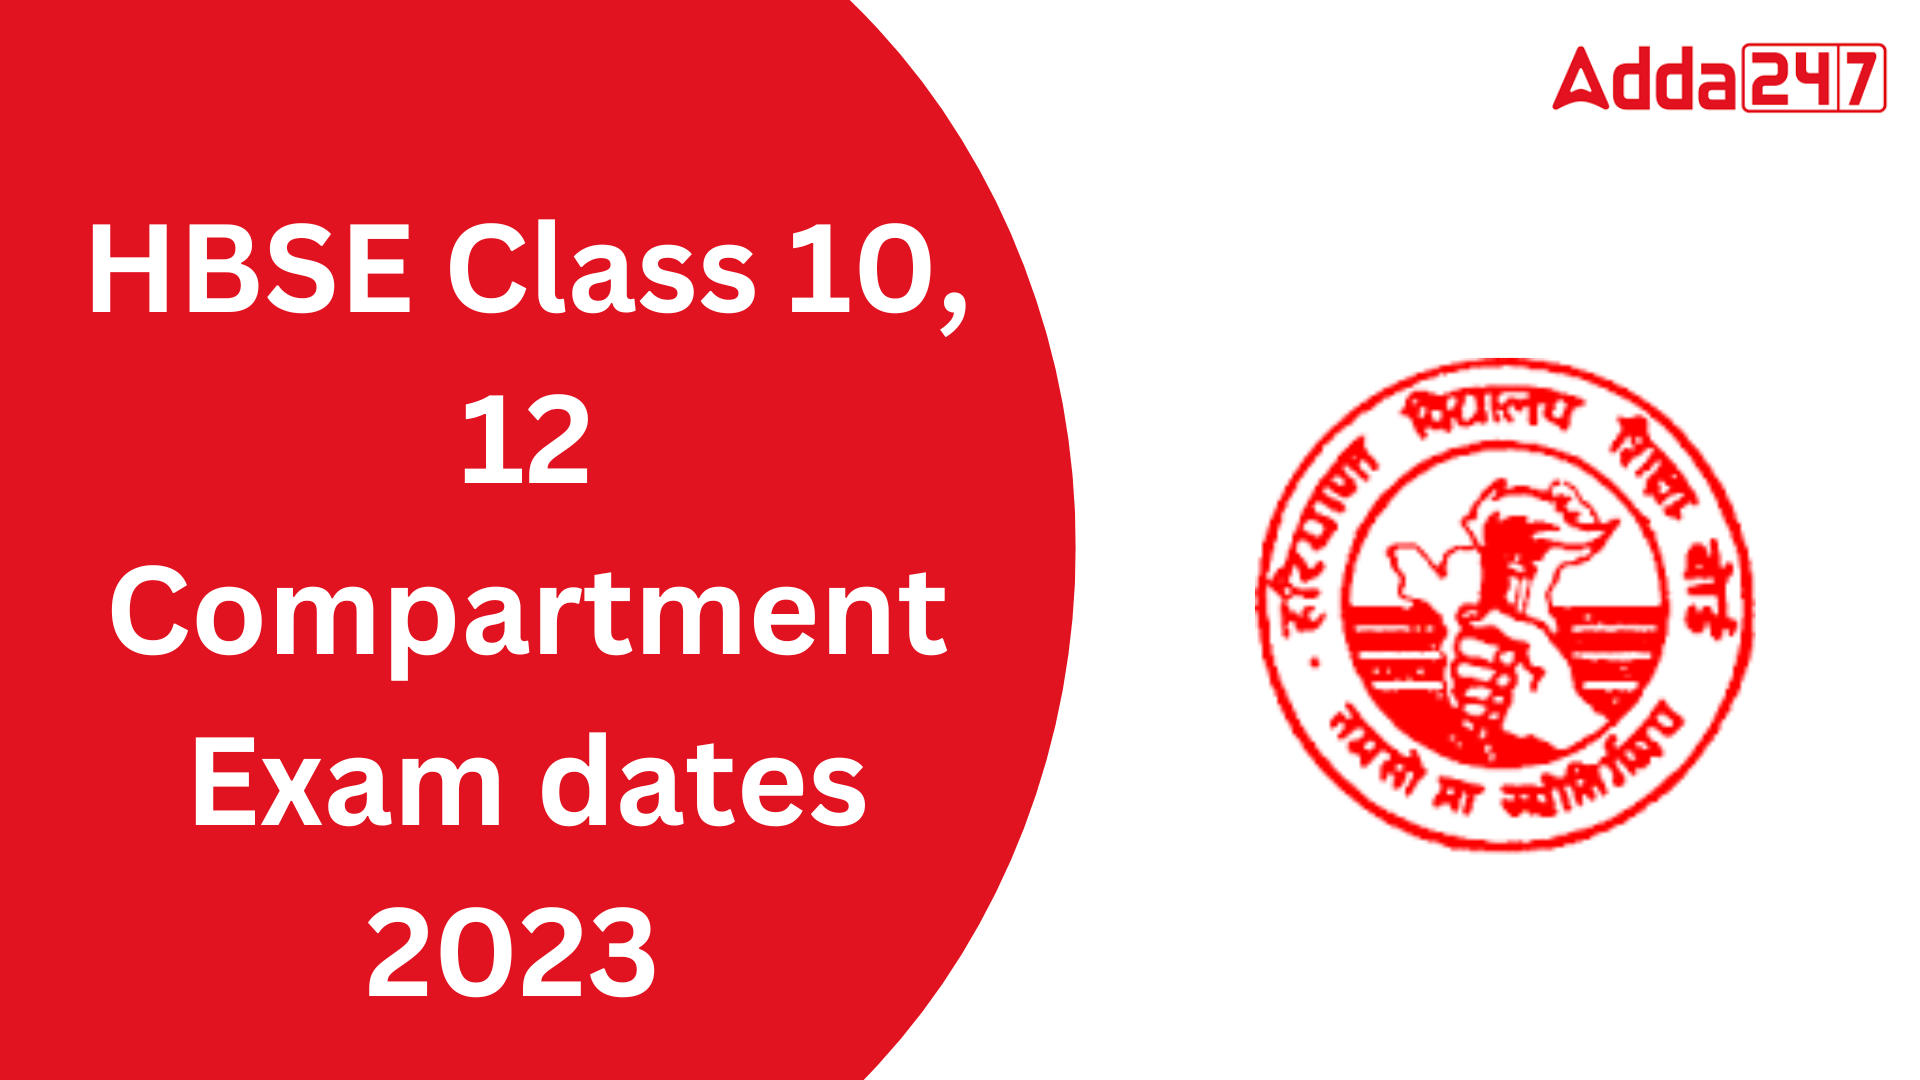 HBSE Class 10, 12 Compartment Exam dates 2023